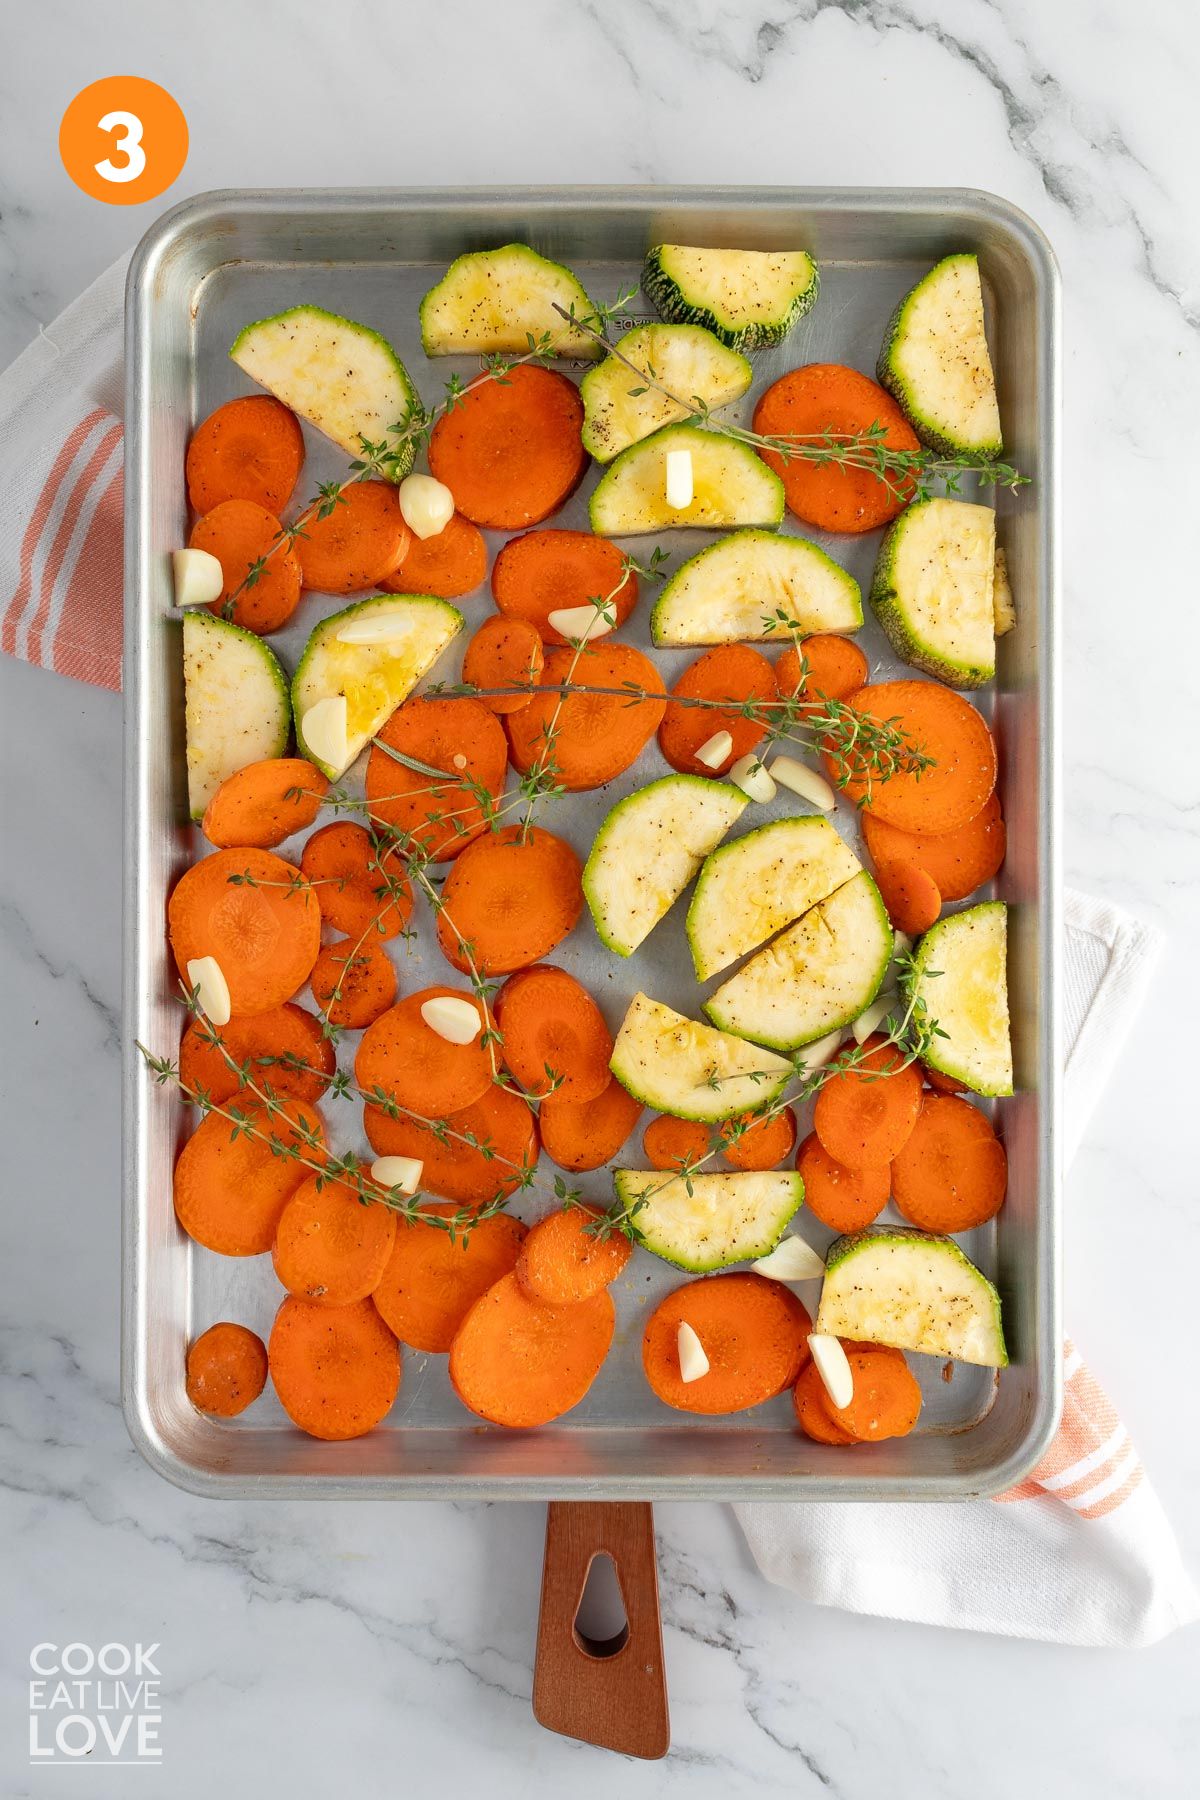 Zucchini and carrots on a baking tray with thyme and garlic.